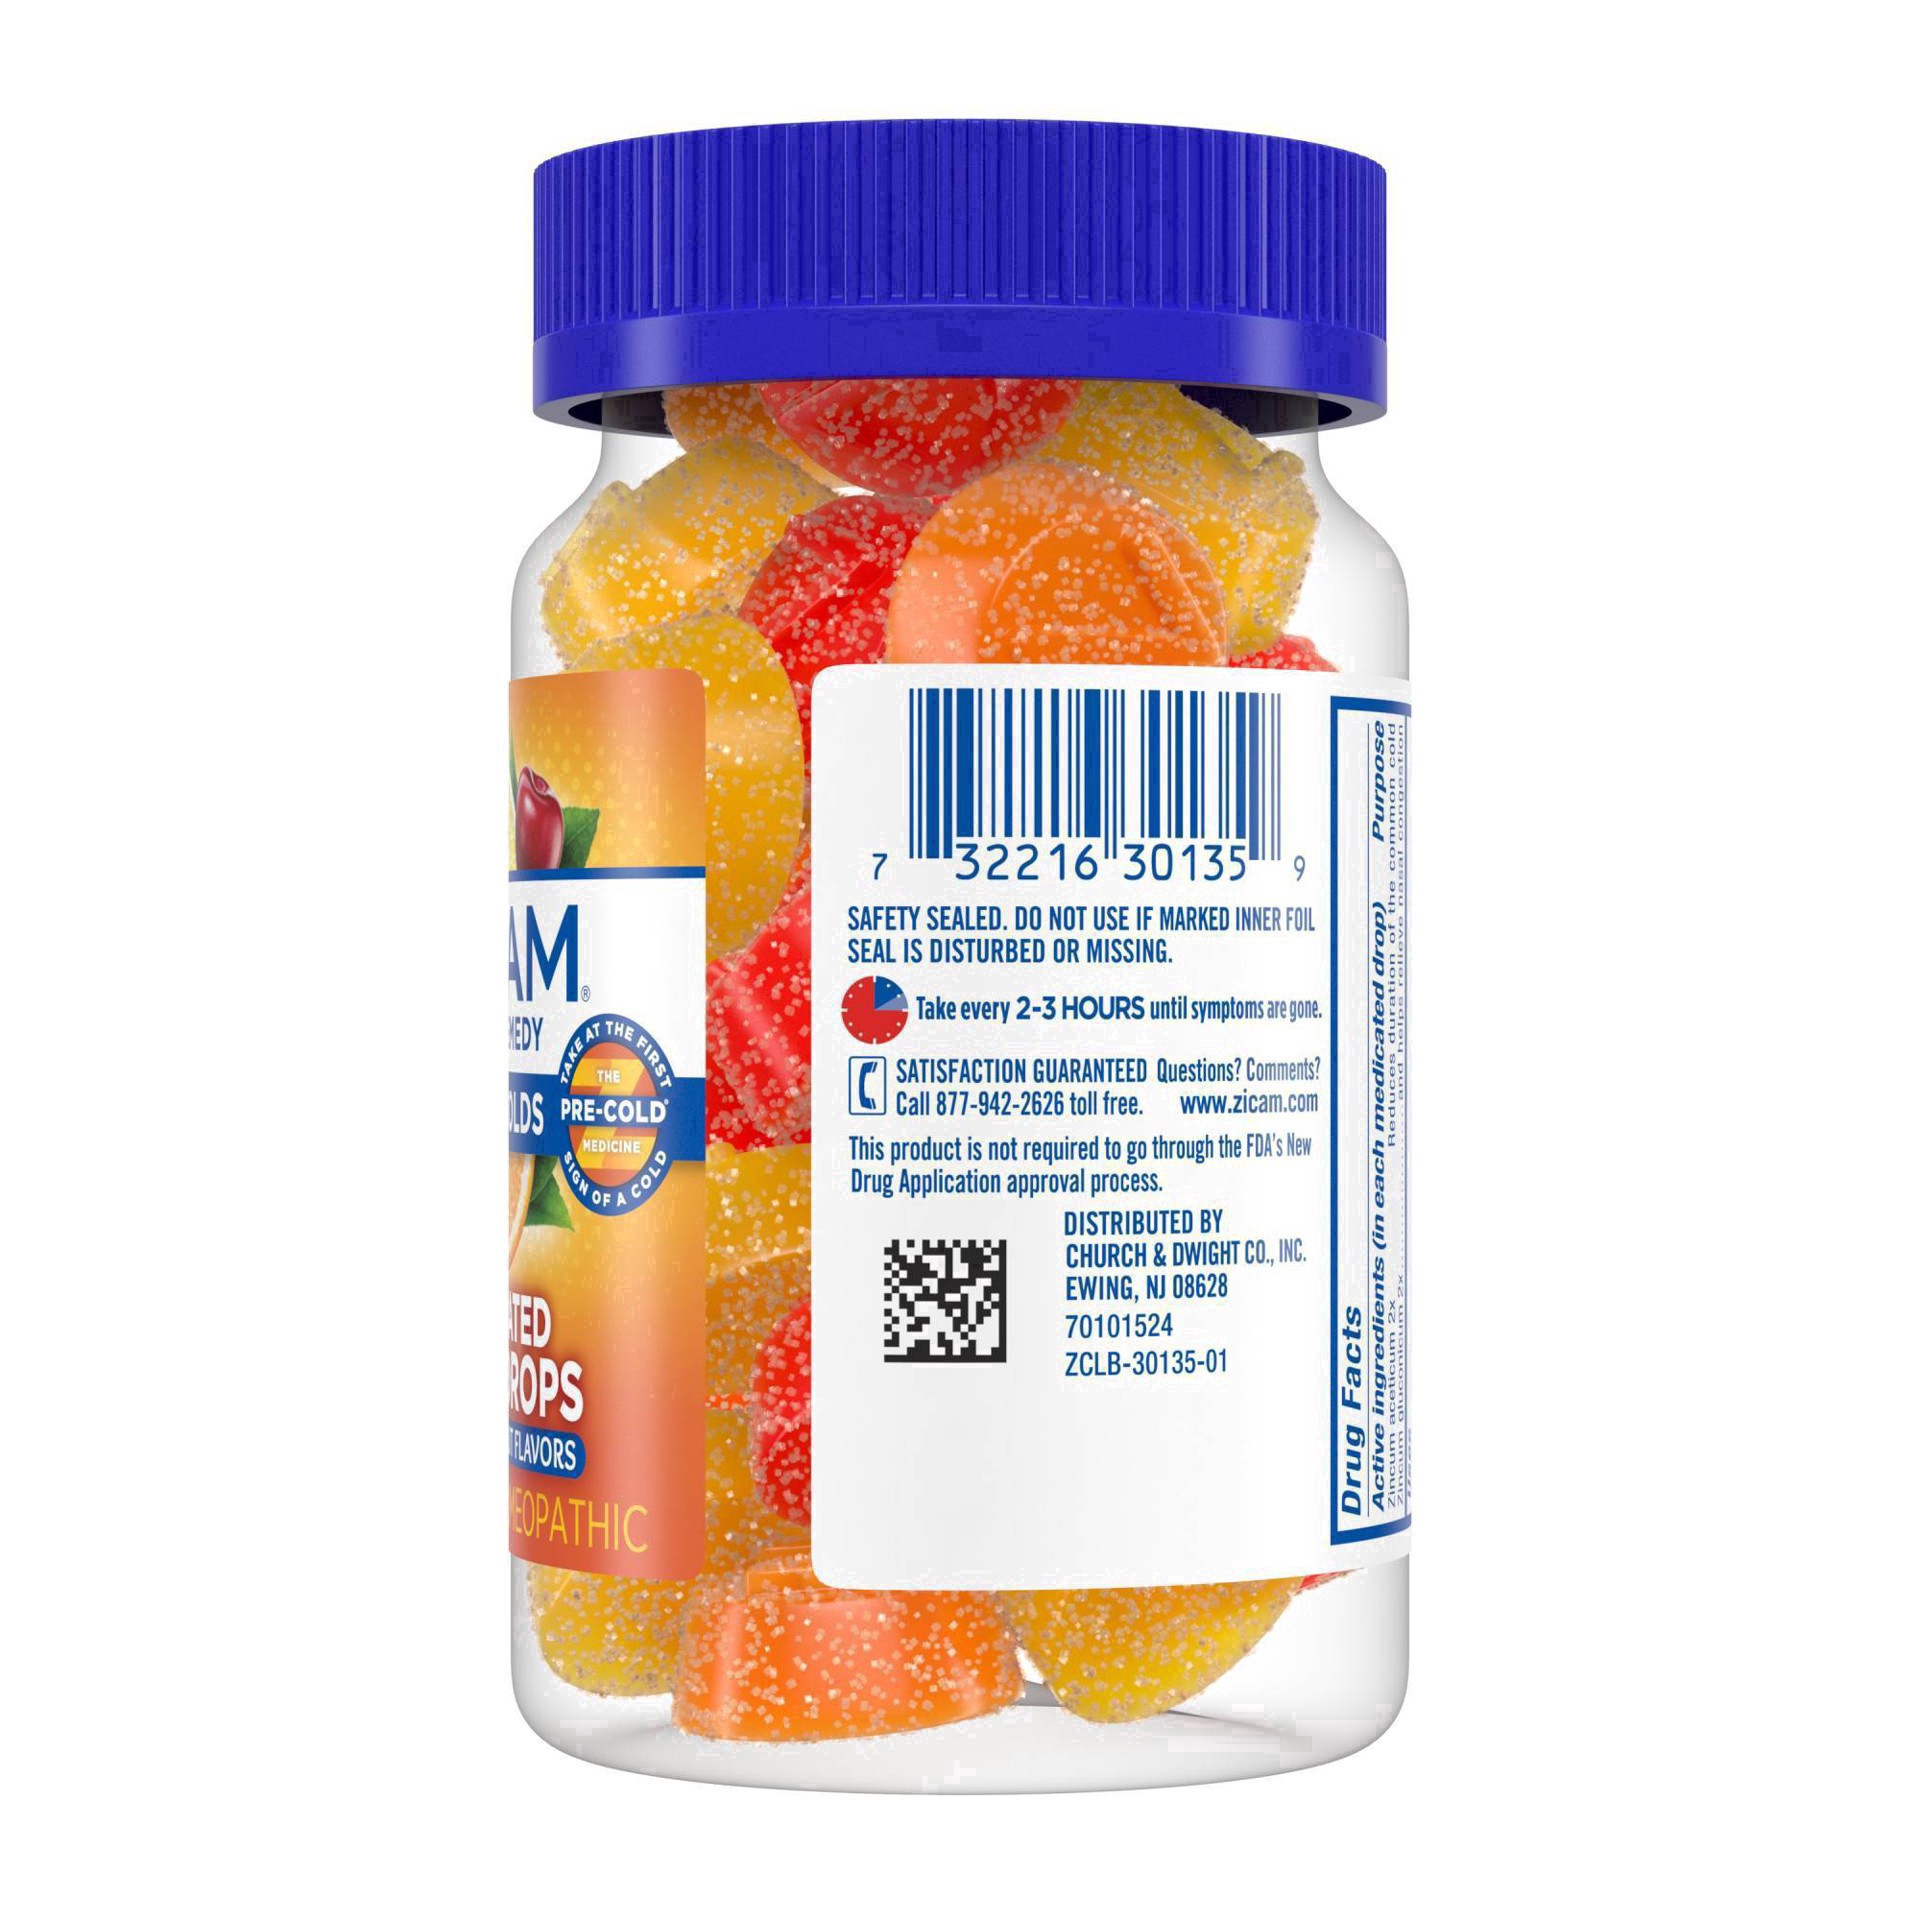 slide 15 of 58, Zicam Cold Remedy Medicated Drops - Fruit - 25ct, 25 ct